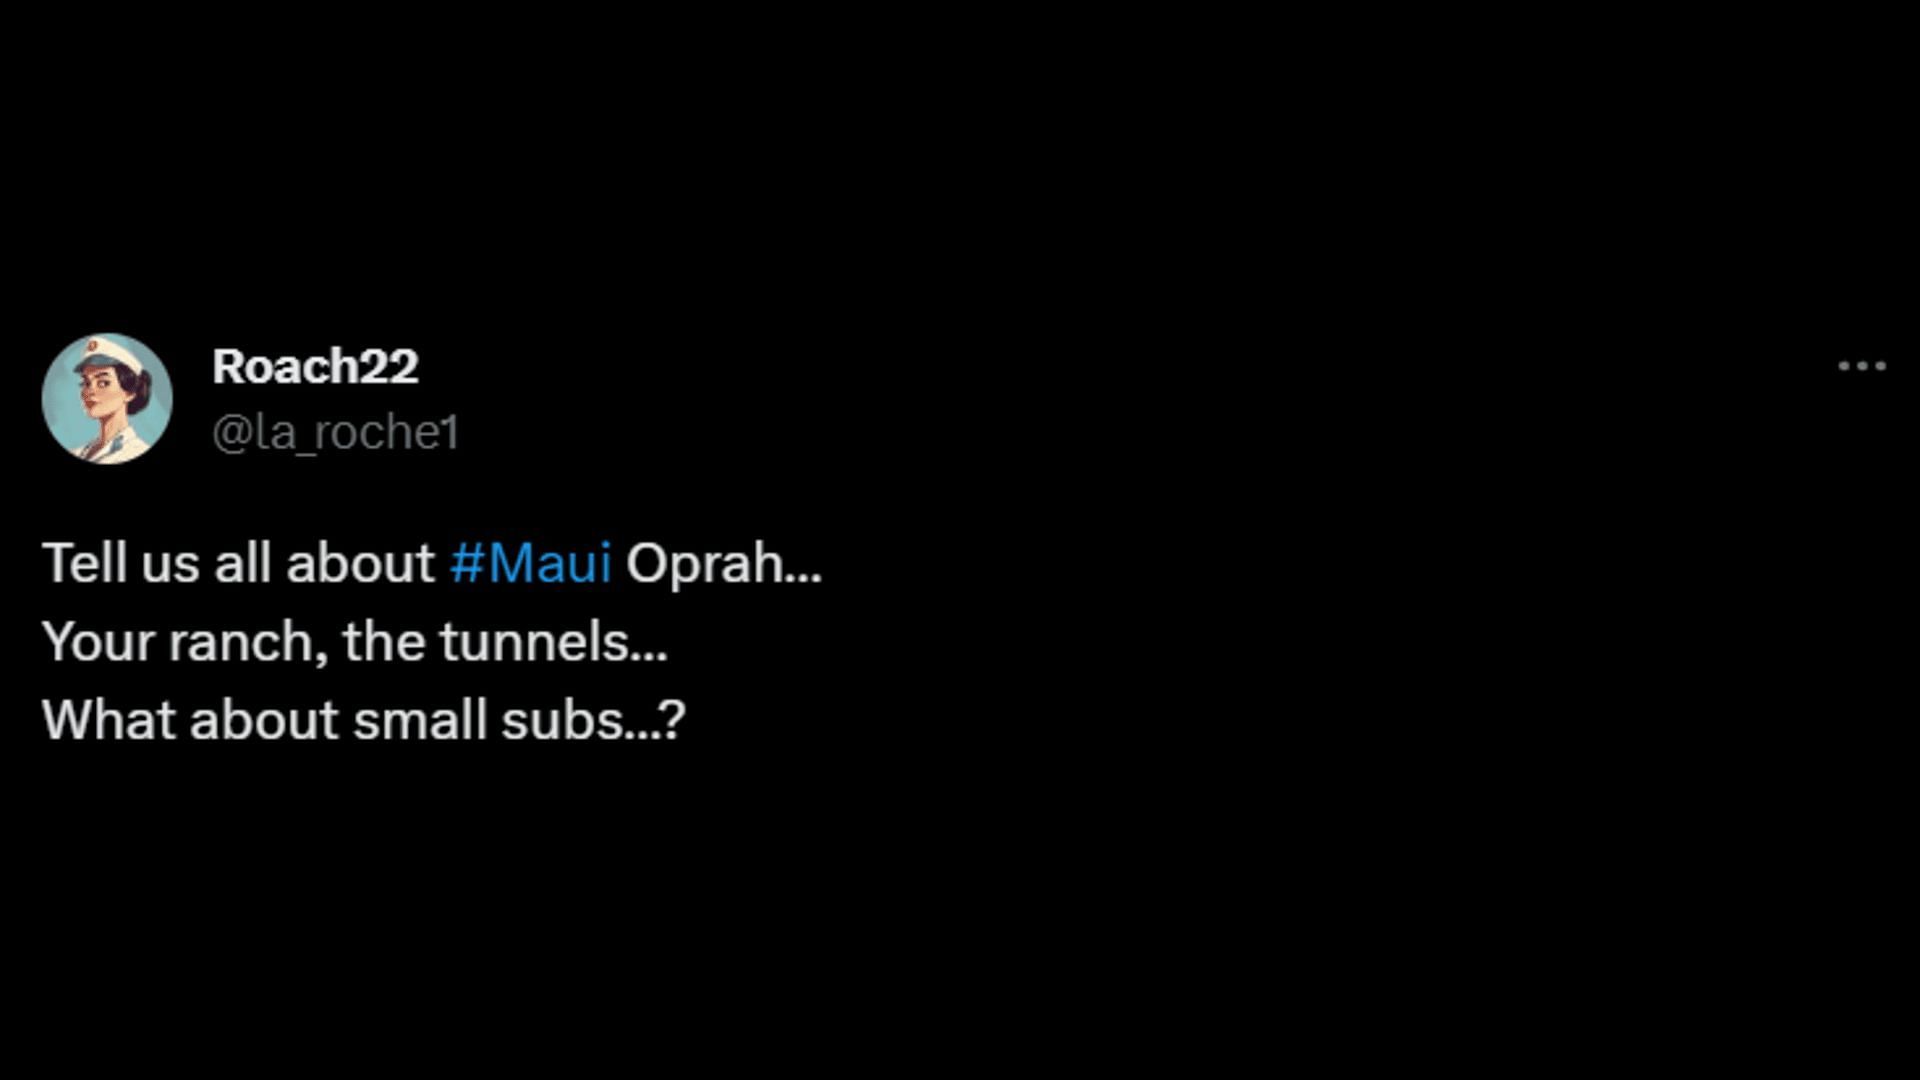 A netizen demands answers from Oprah in relation to the Hawaii wildfire. (Image via Twitter/Roach22)